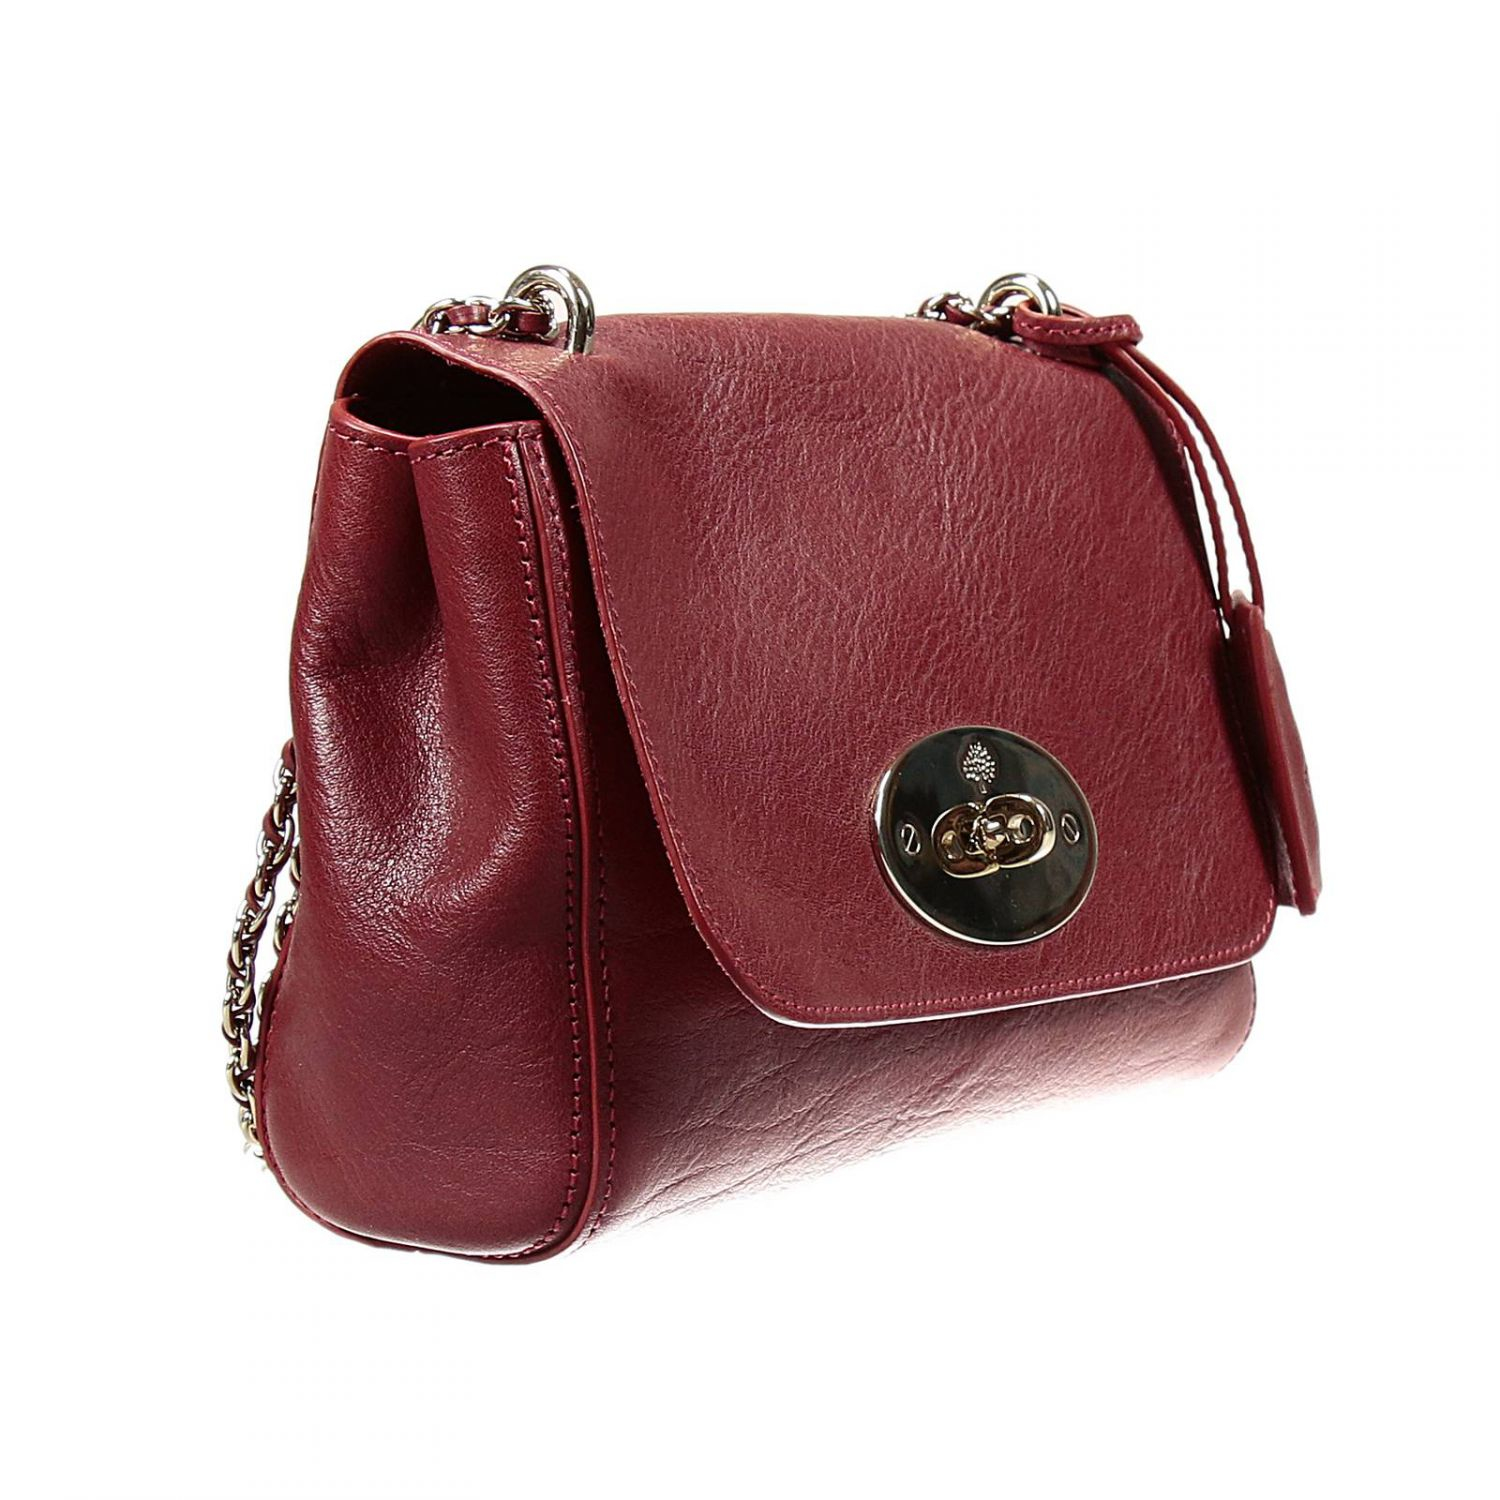 Lyst - Mulberry Blossom Perforated Leather Shoulder Bag in Red